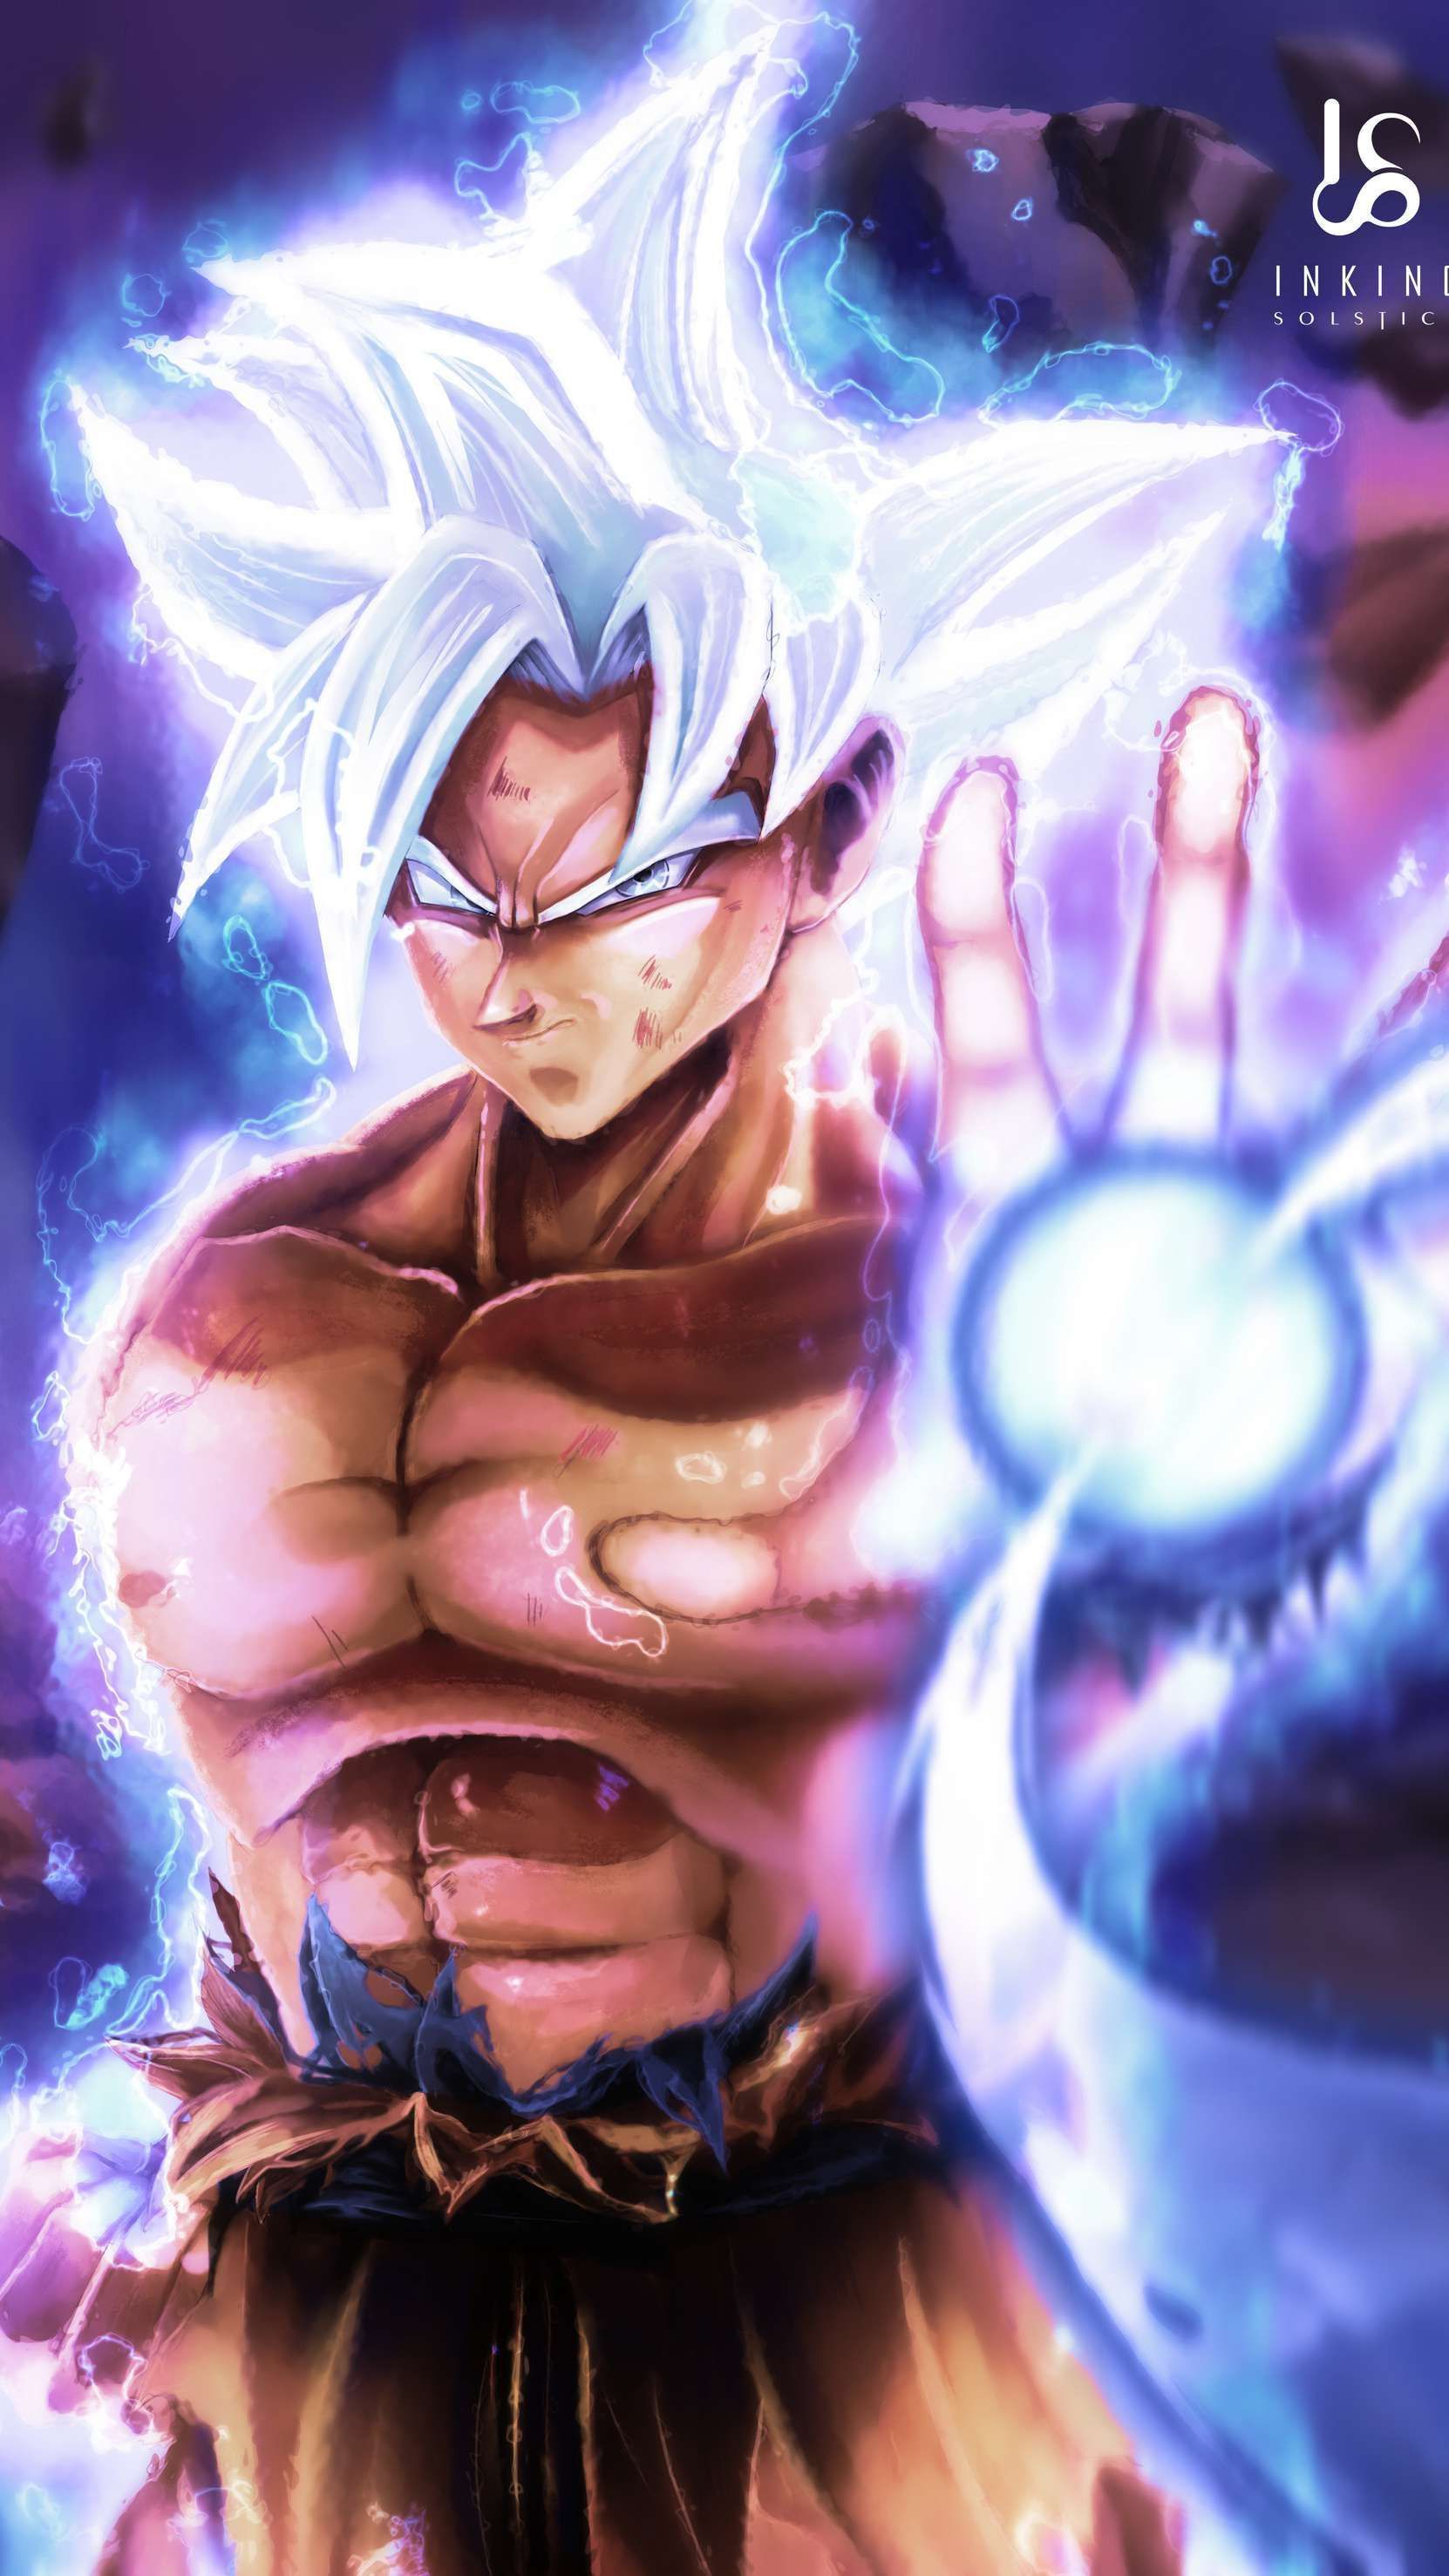 Download Cool Background for iPhone XS /XS Max 2019. Goku